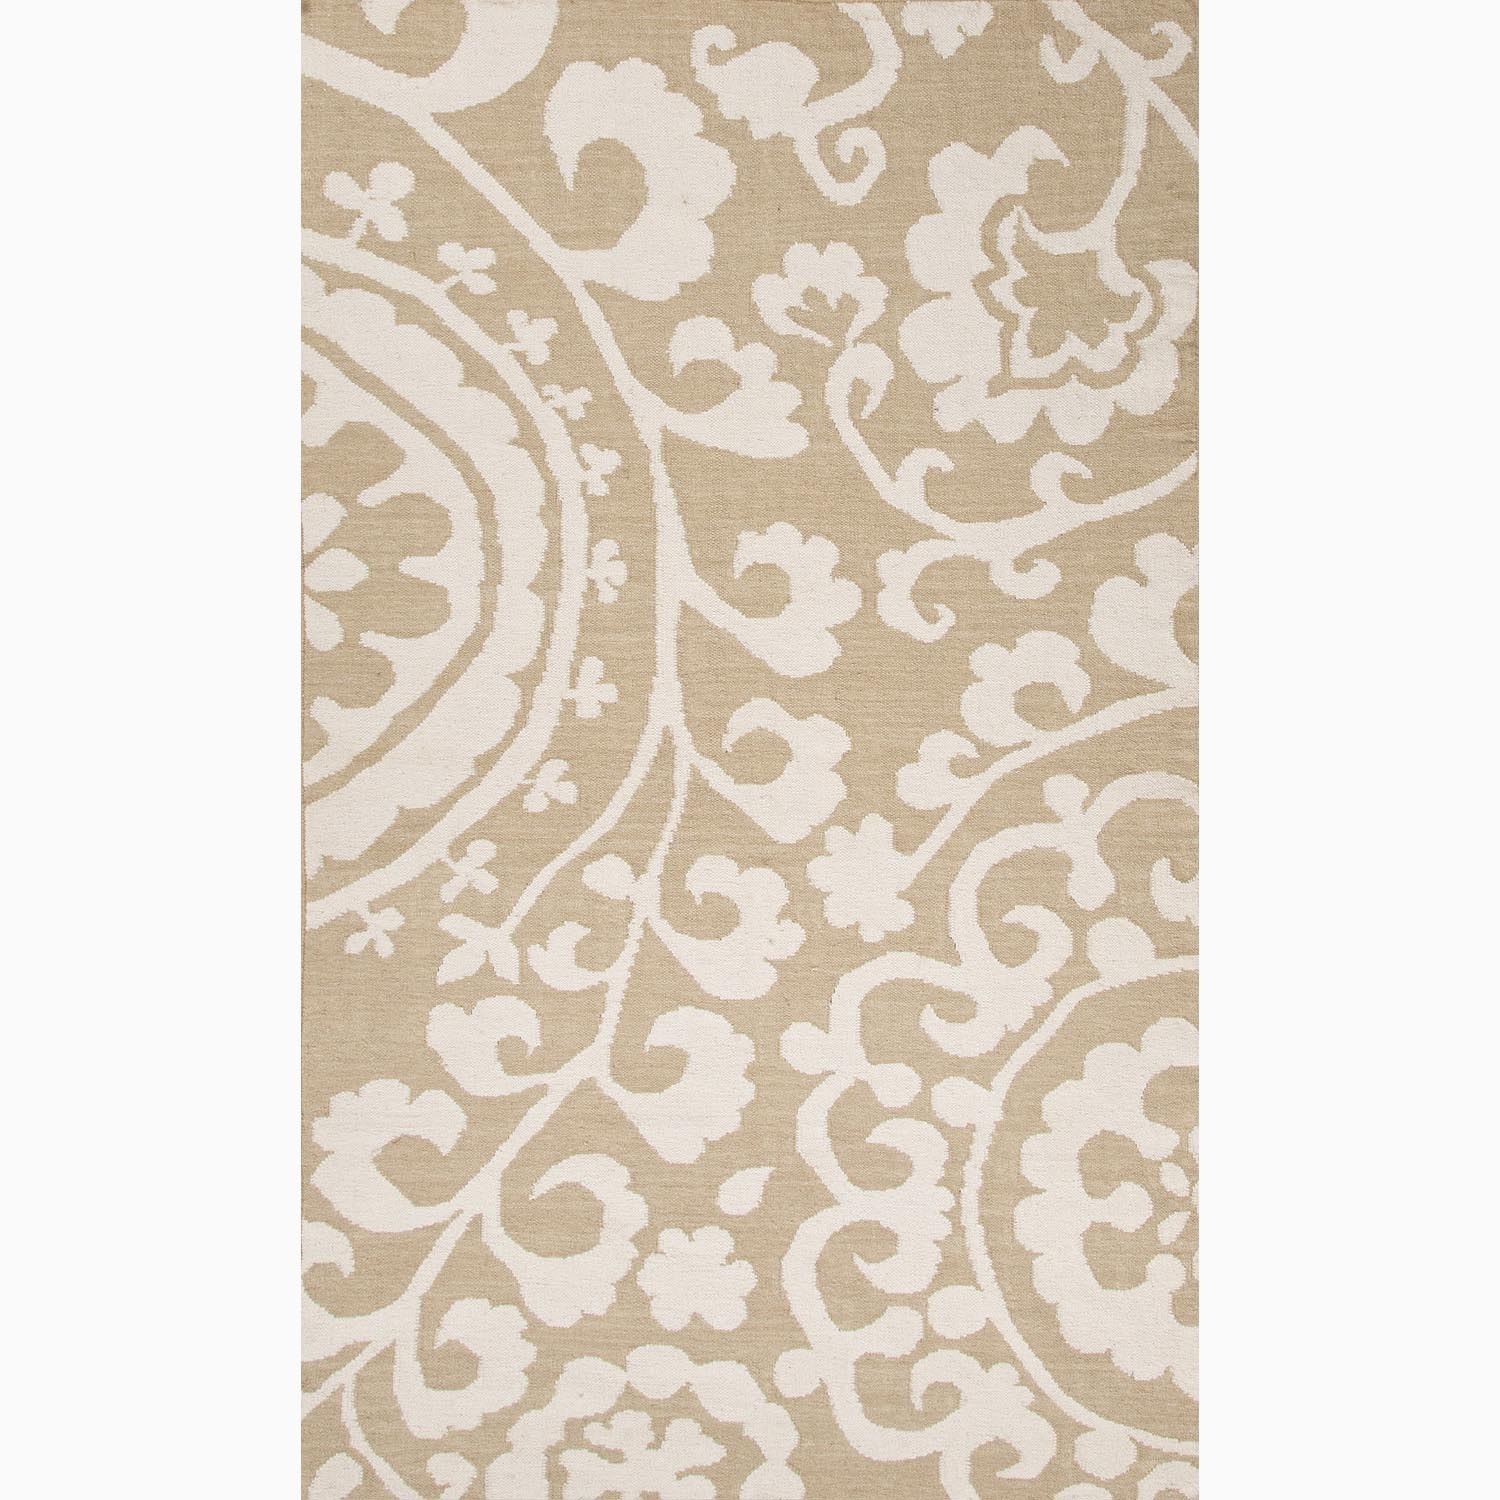 Hand made Floral Pattern Taupe/ Ivory Wool Rug (8x10)